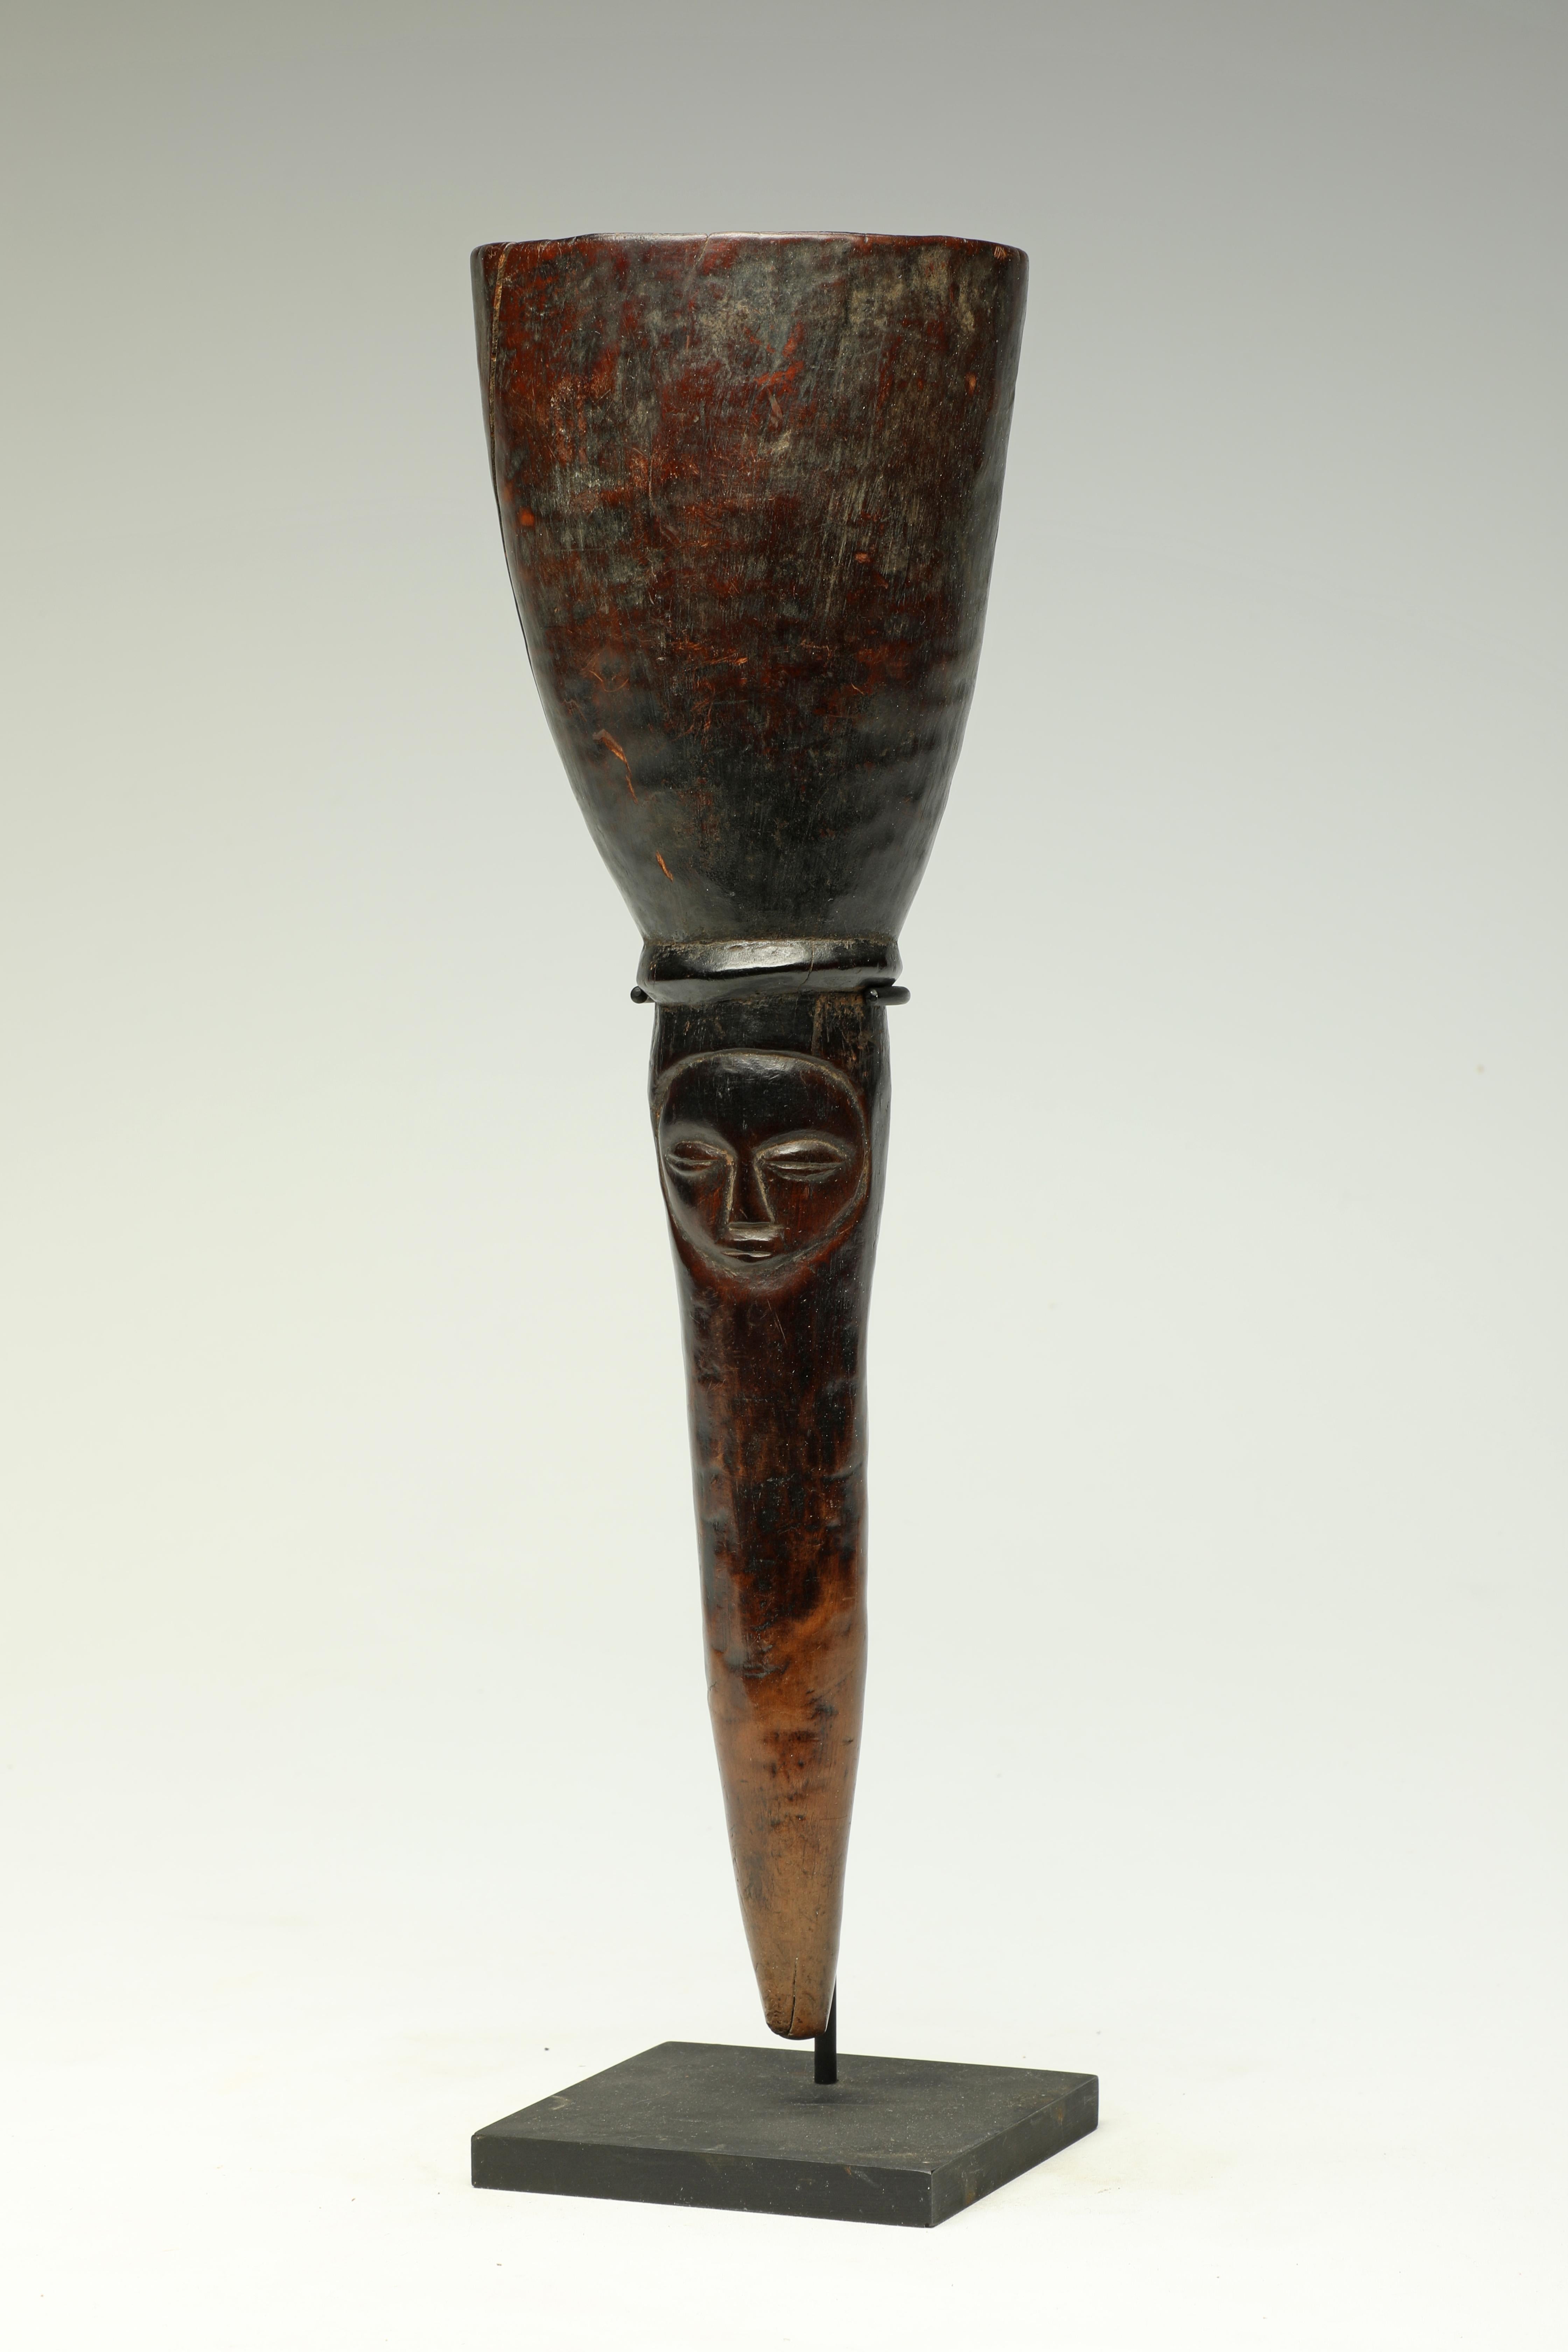 Old and well used Luba wood medicine mortar with classic Luba face, DRC Africa.
The mortar is heavily worn and polished outside from many years of use, and the inside shows deep wear. Old stable cracks down side and back.
Measures: 12 1/2 x 3 1/4 x